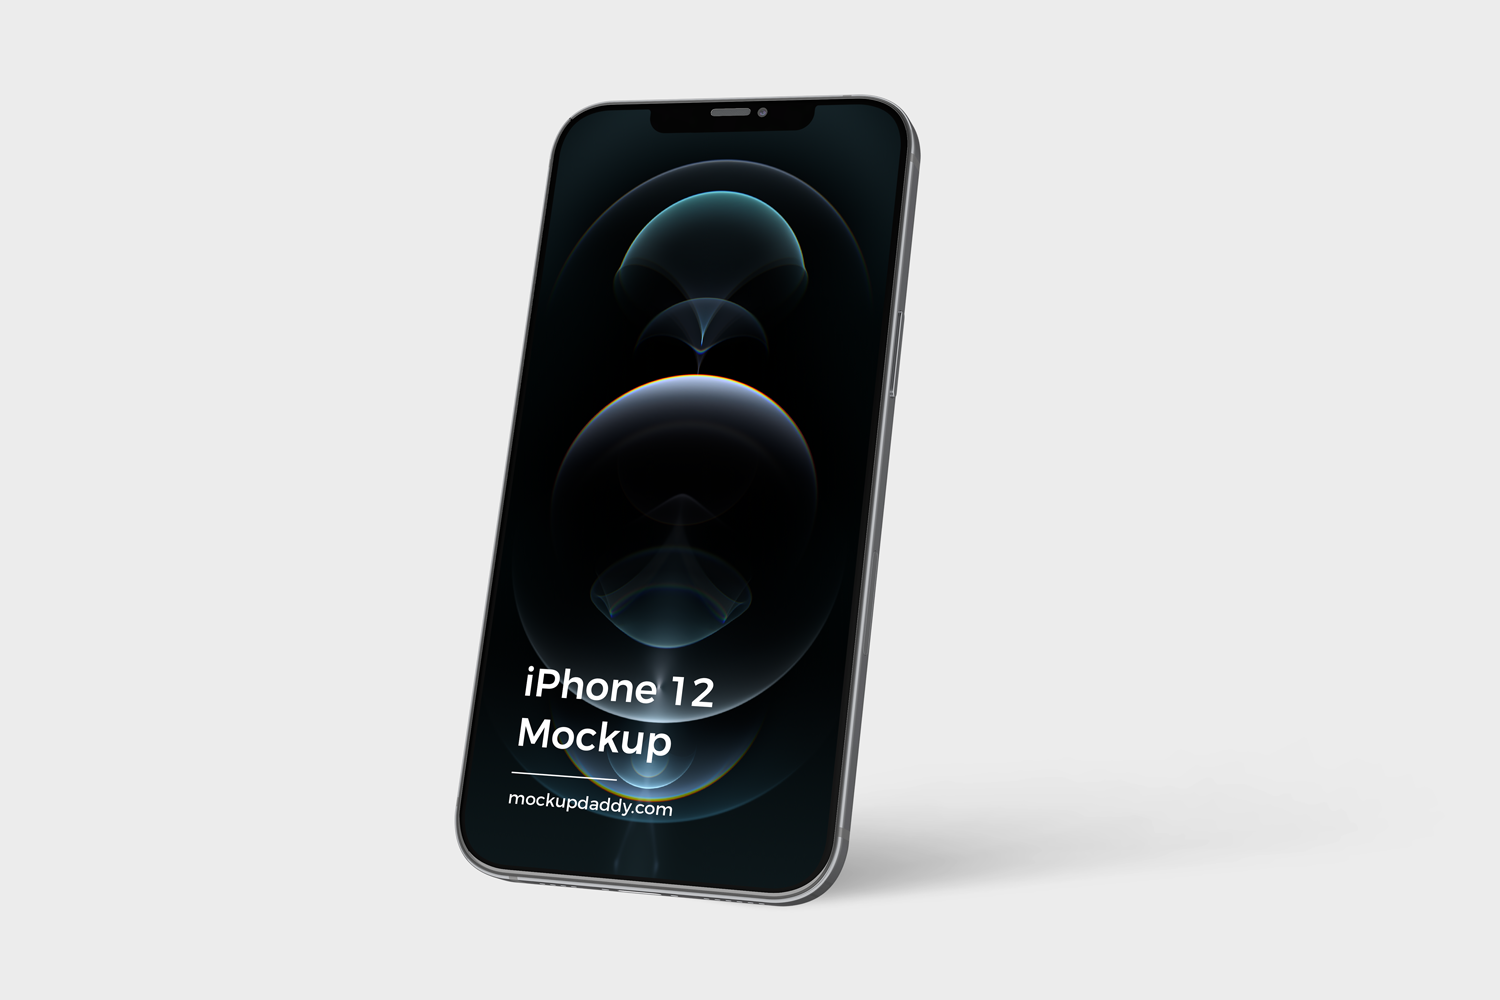 Download iPhone 12 Mockup, Clean and High Quality 3D Renders - Mockup Daddy